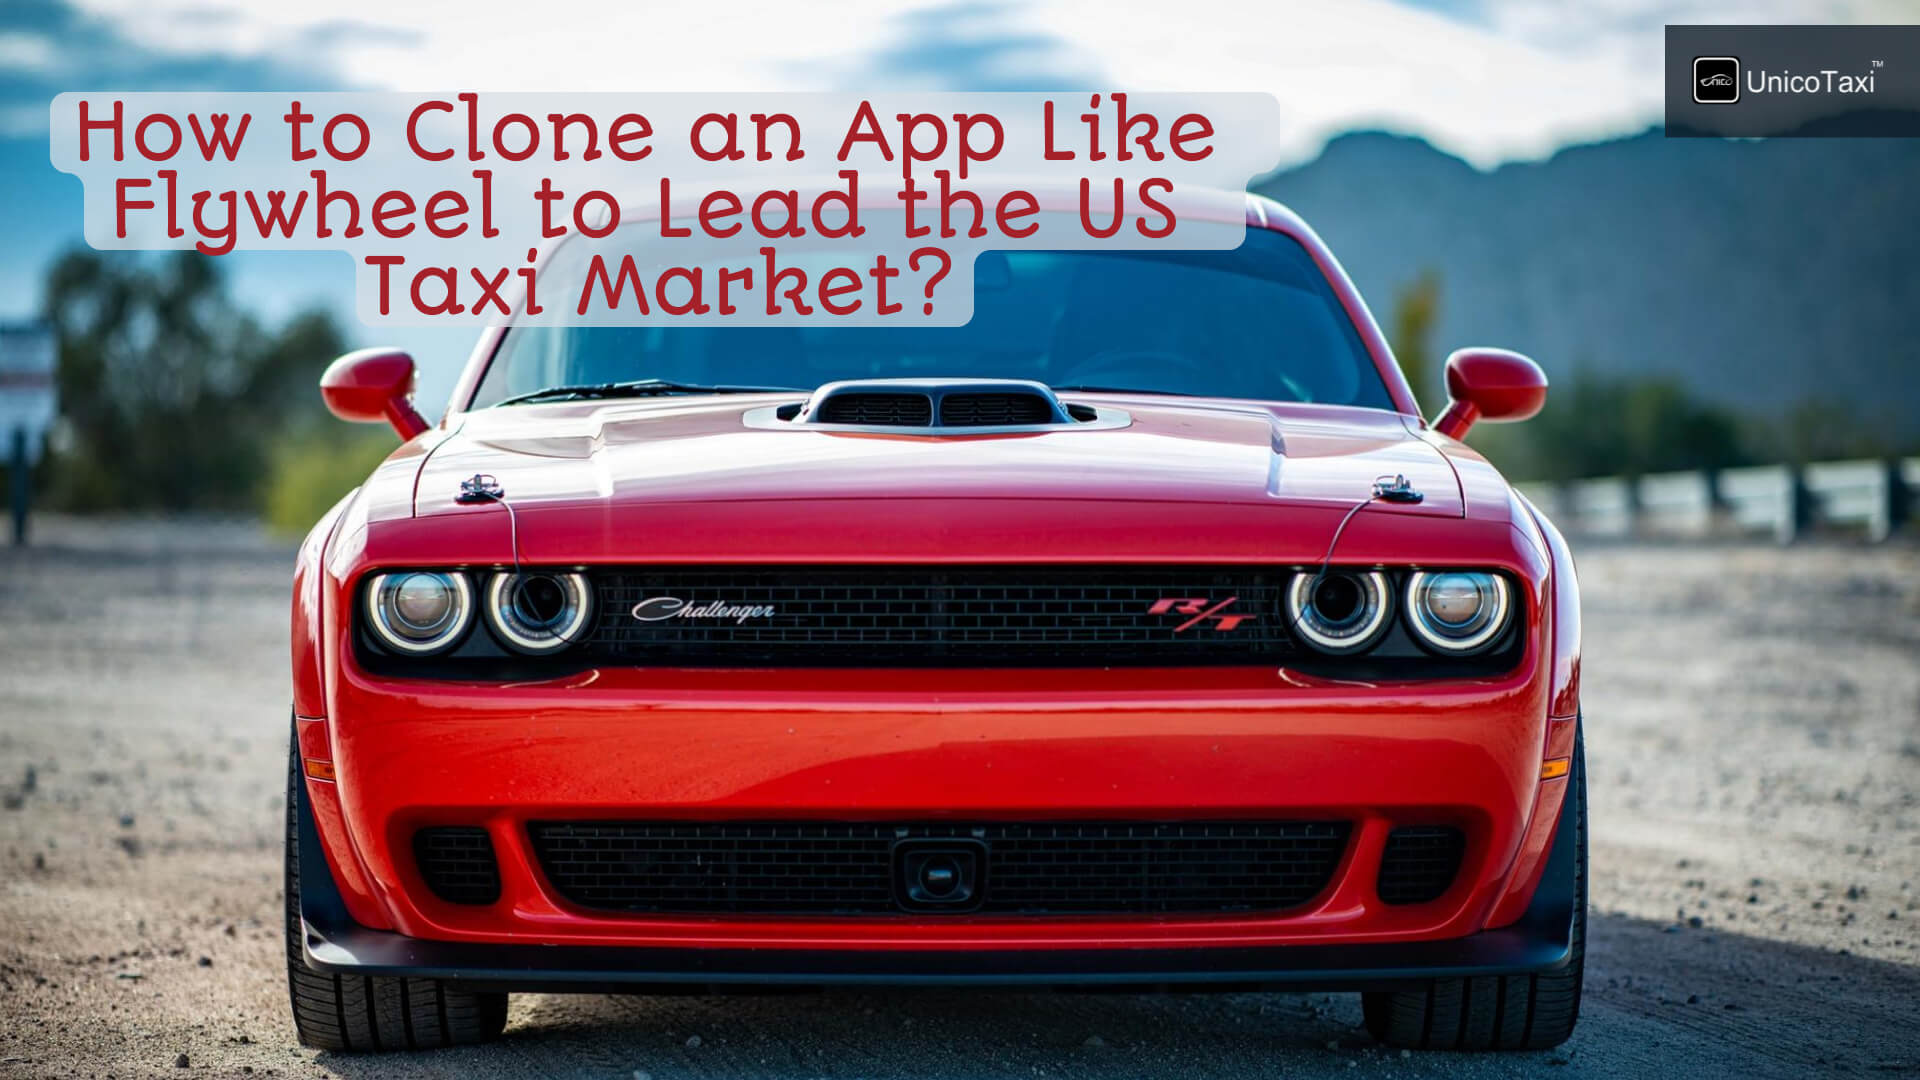 How to Clone an App Like Flywheel to Lead the US Taxi Market?